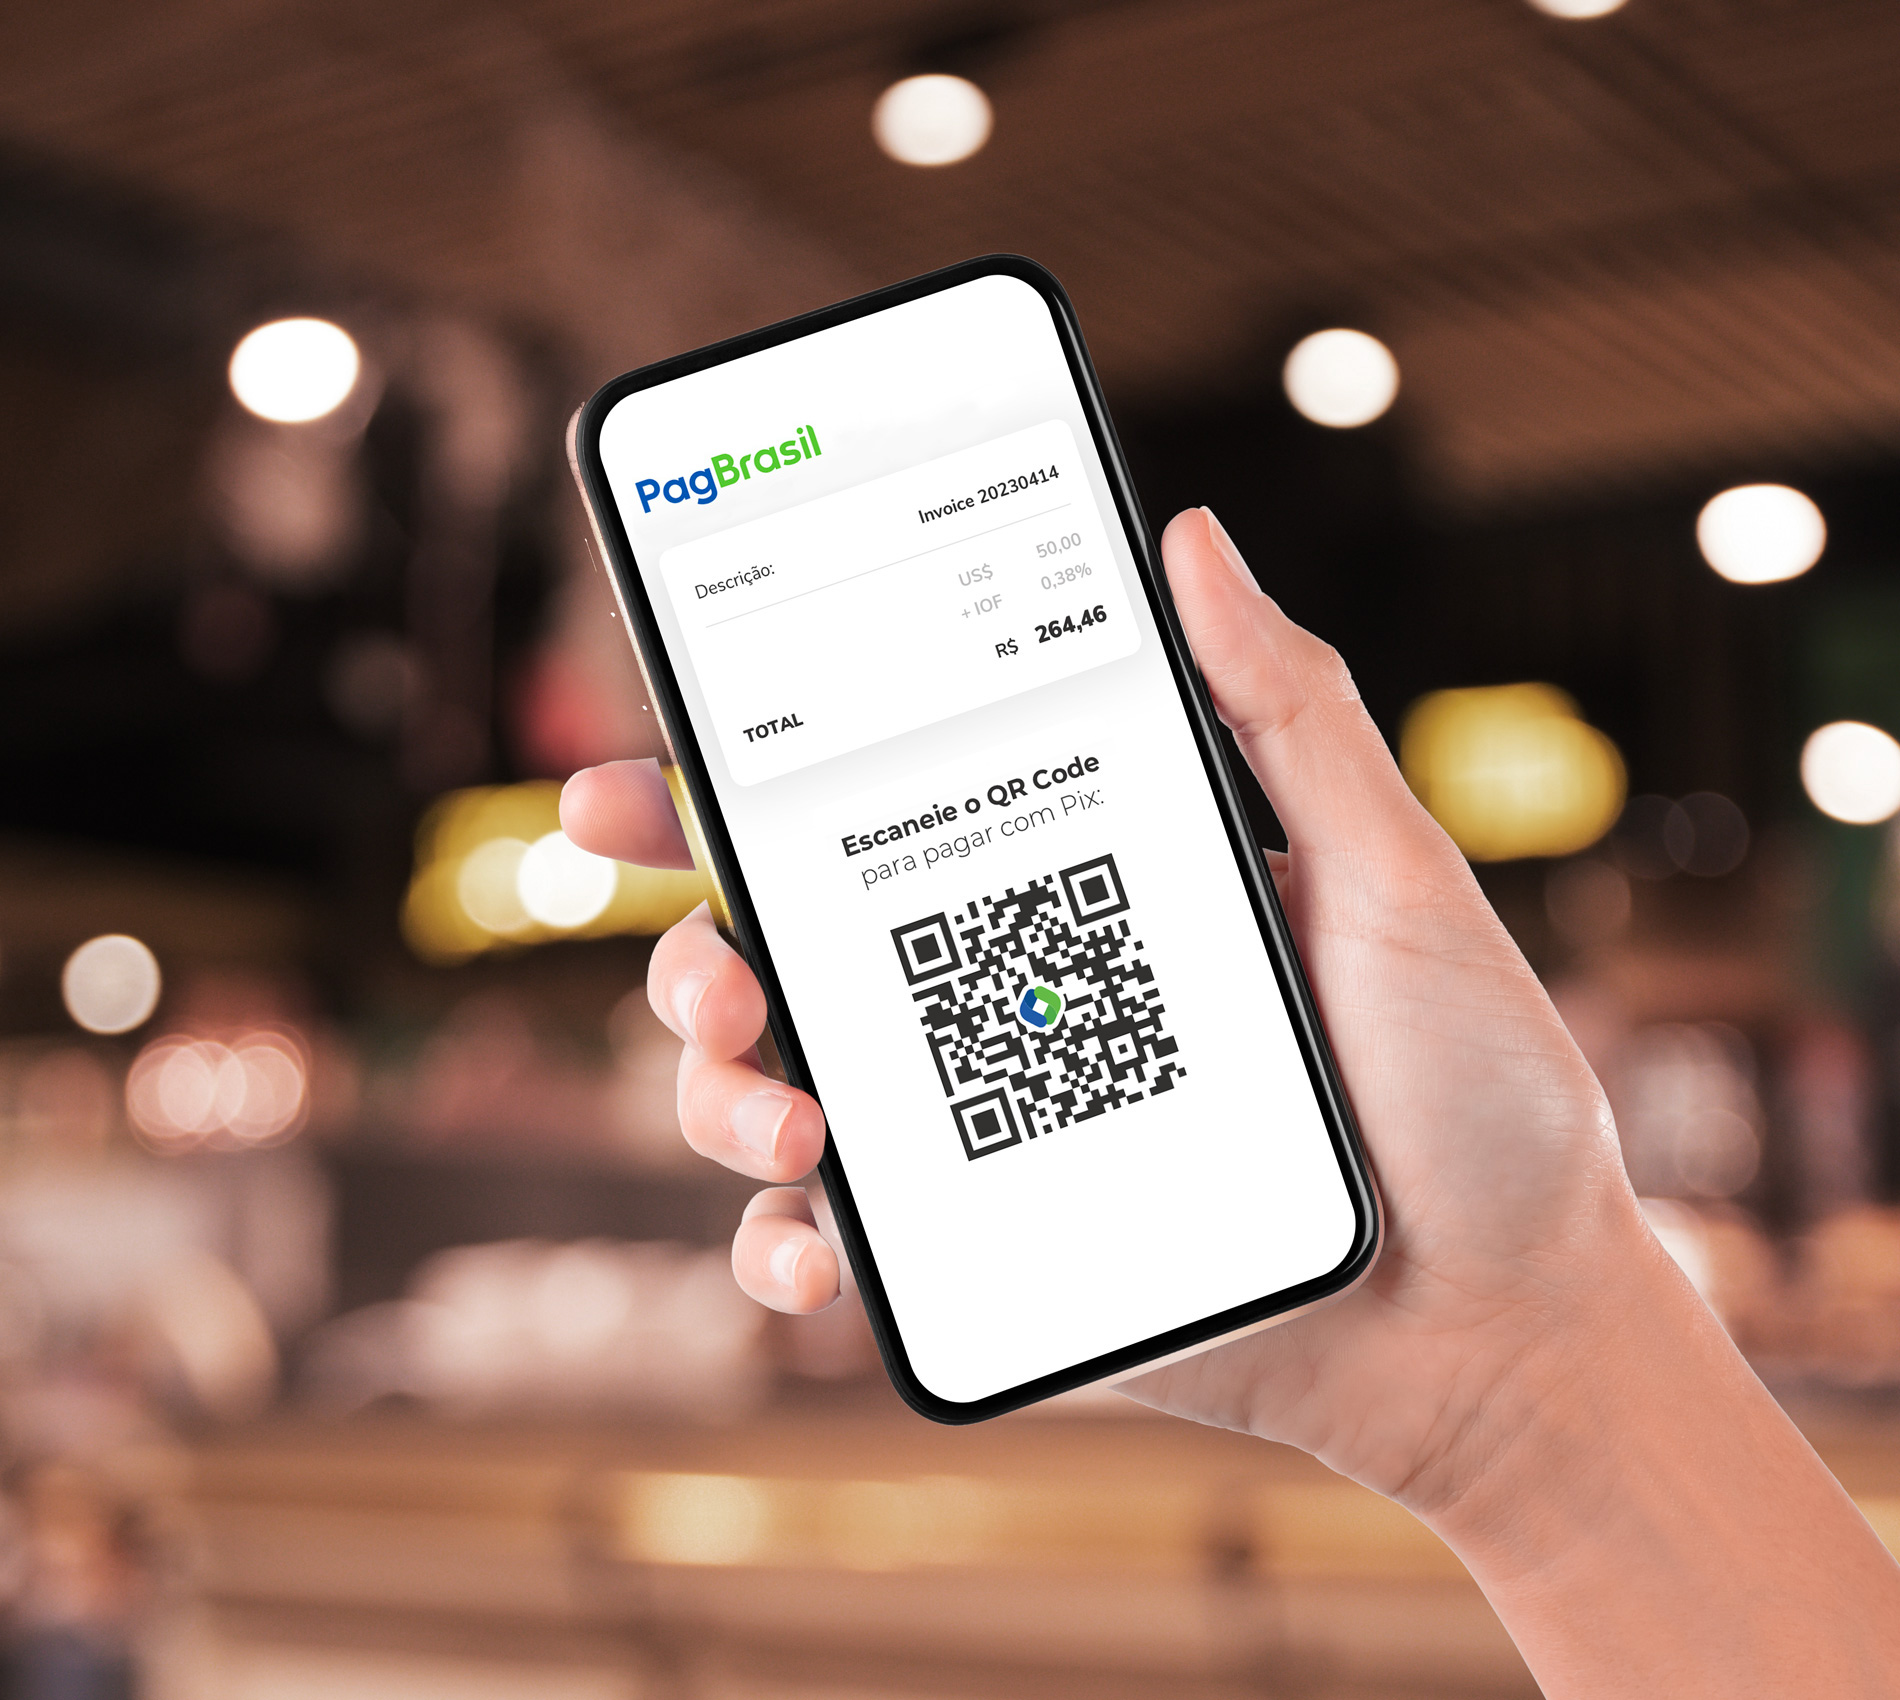 International Pix: PagBrasil launches mobile POS solution with real-time currency exchange